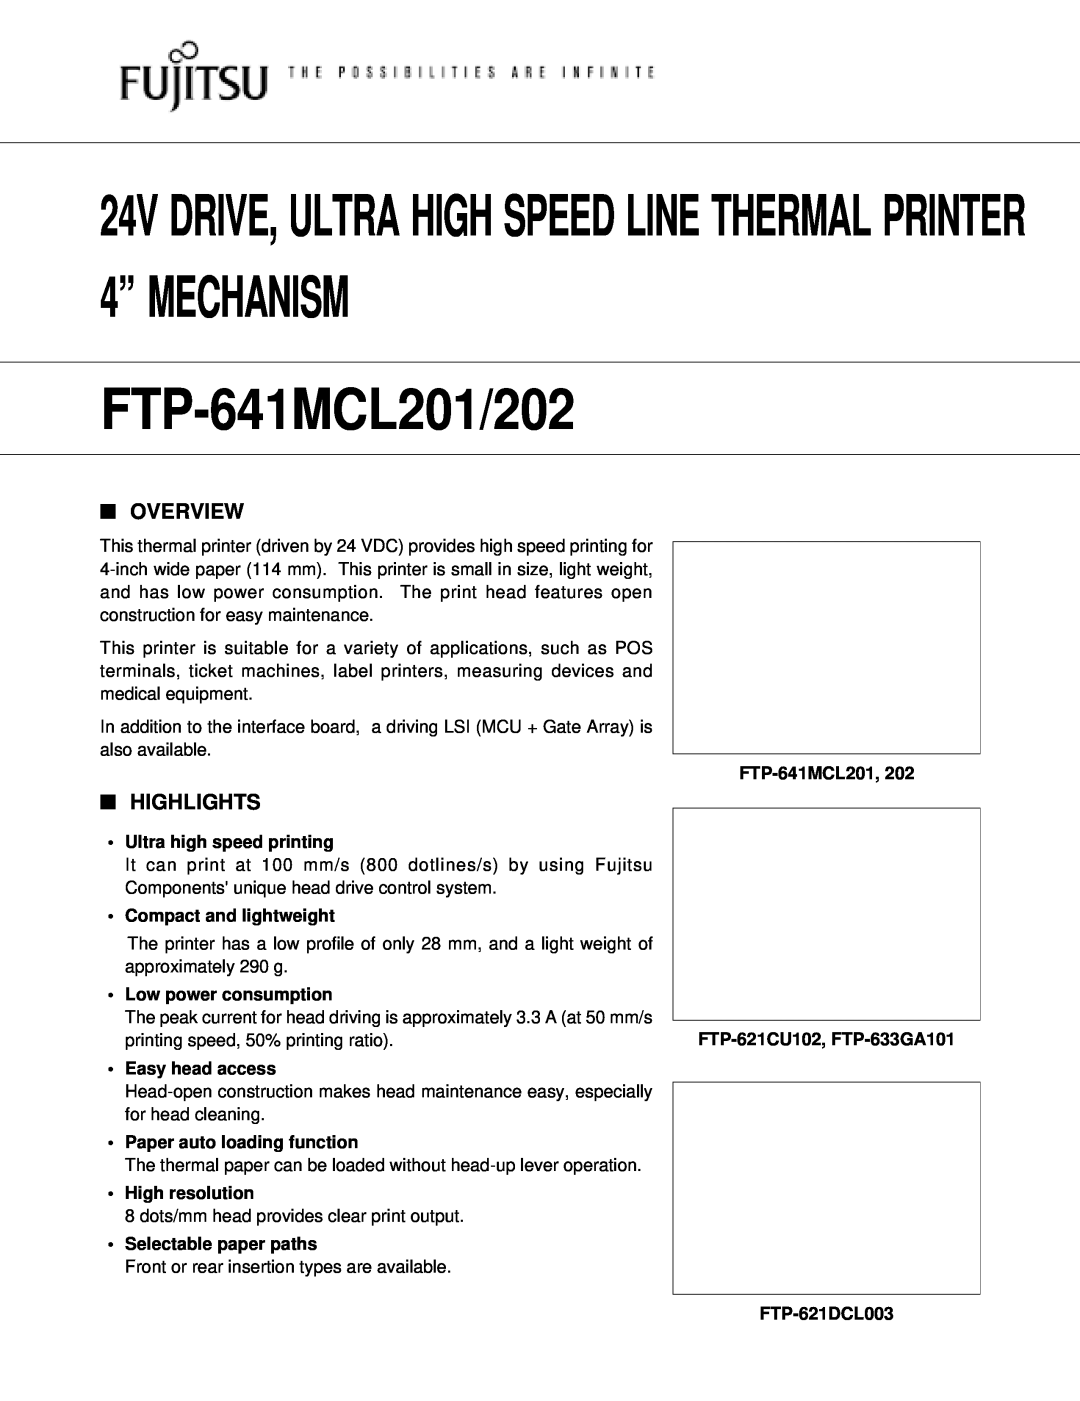 Fujitsu FTP-641MCL201 manual Overview, Highlights, Ultra high speed printing, Compact and lightweight, Easy head access 